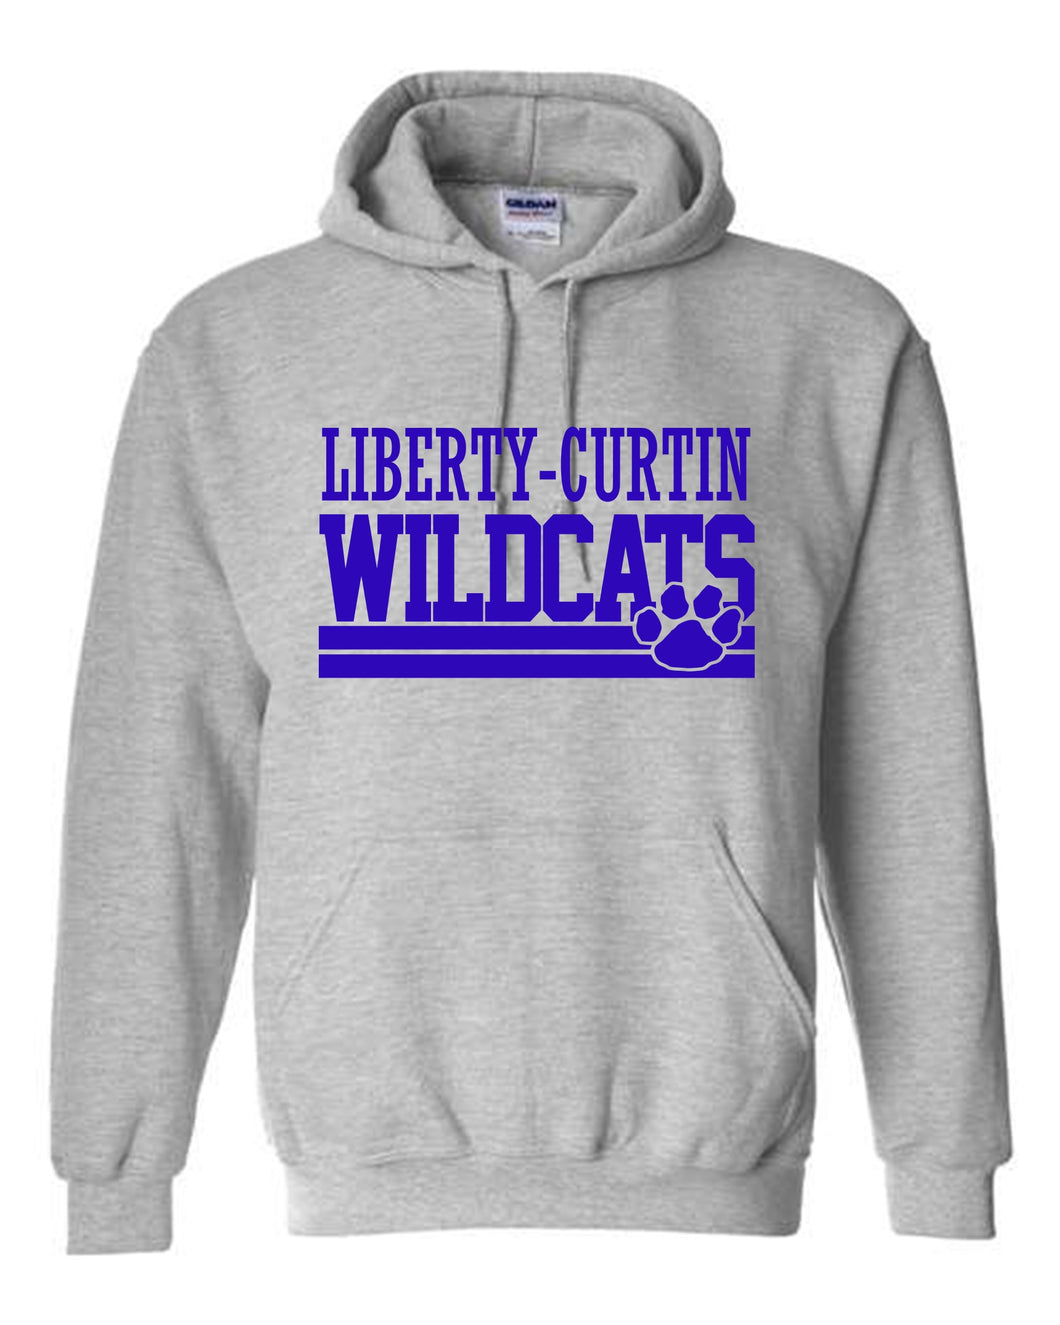 Wildcats (Option to add LC or CM) Hoodie (Youth and Adult)